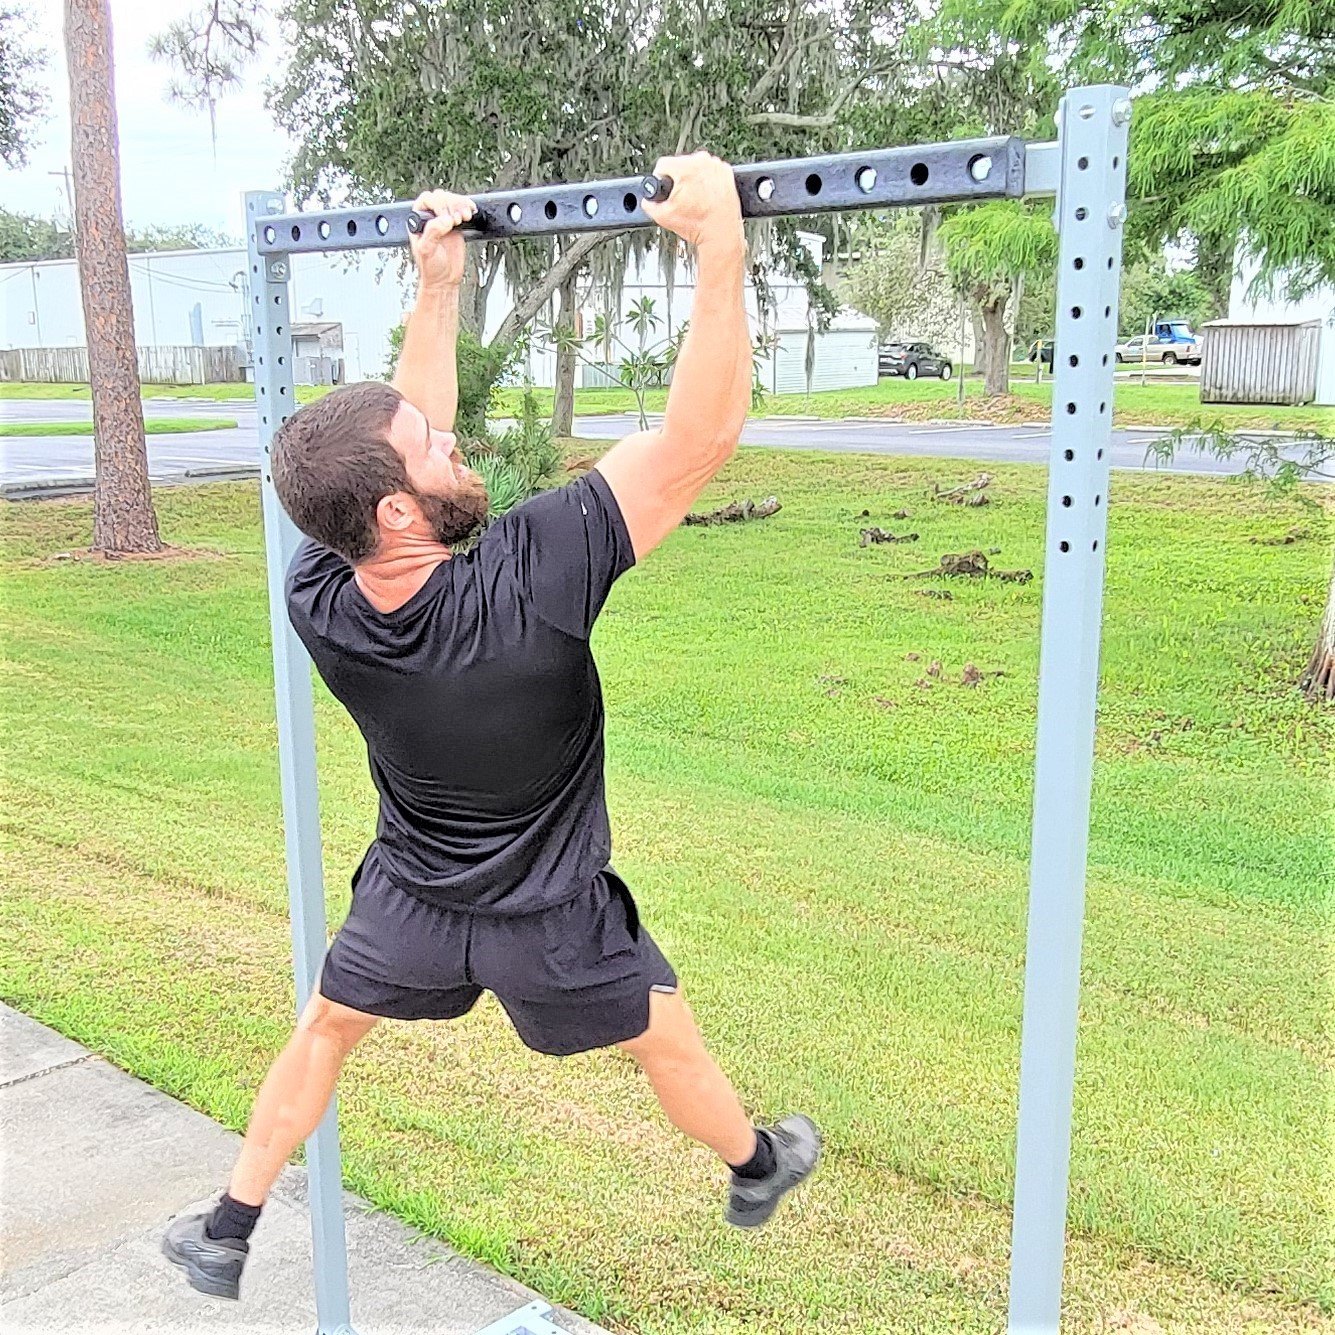 Portable Monkey Bars - FitBar Grip, Obstacle, Strength Equipment